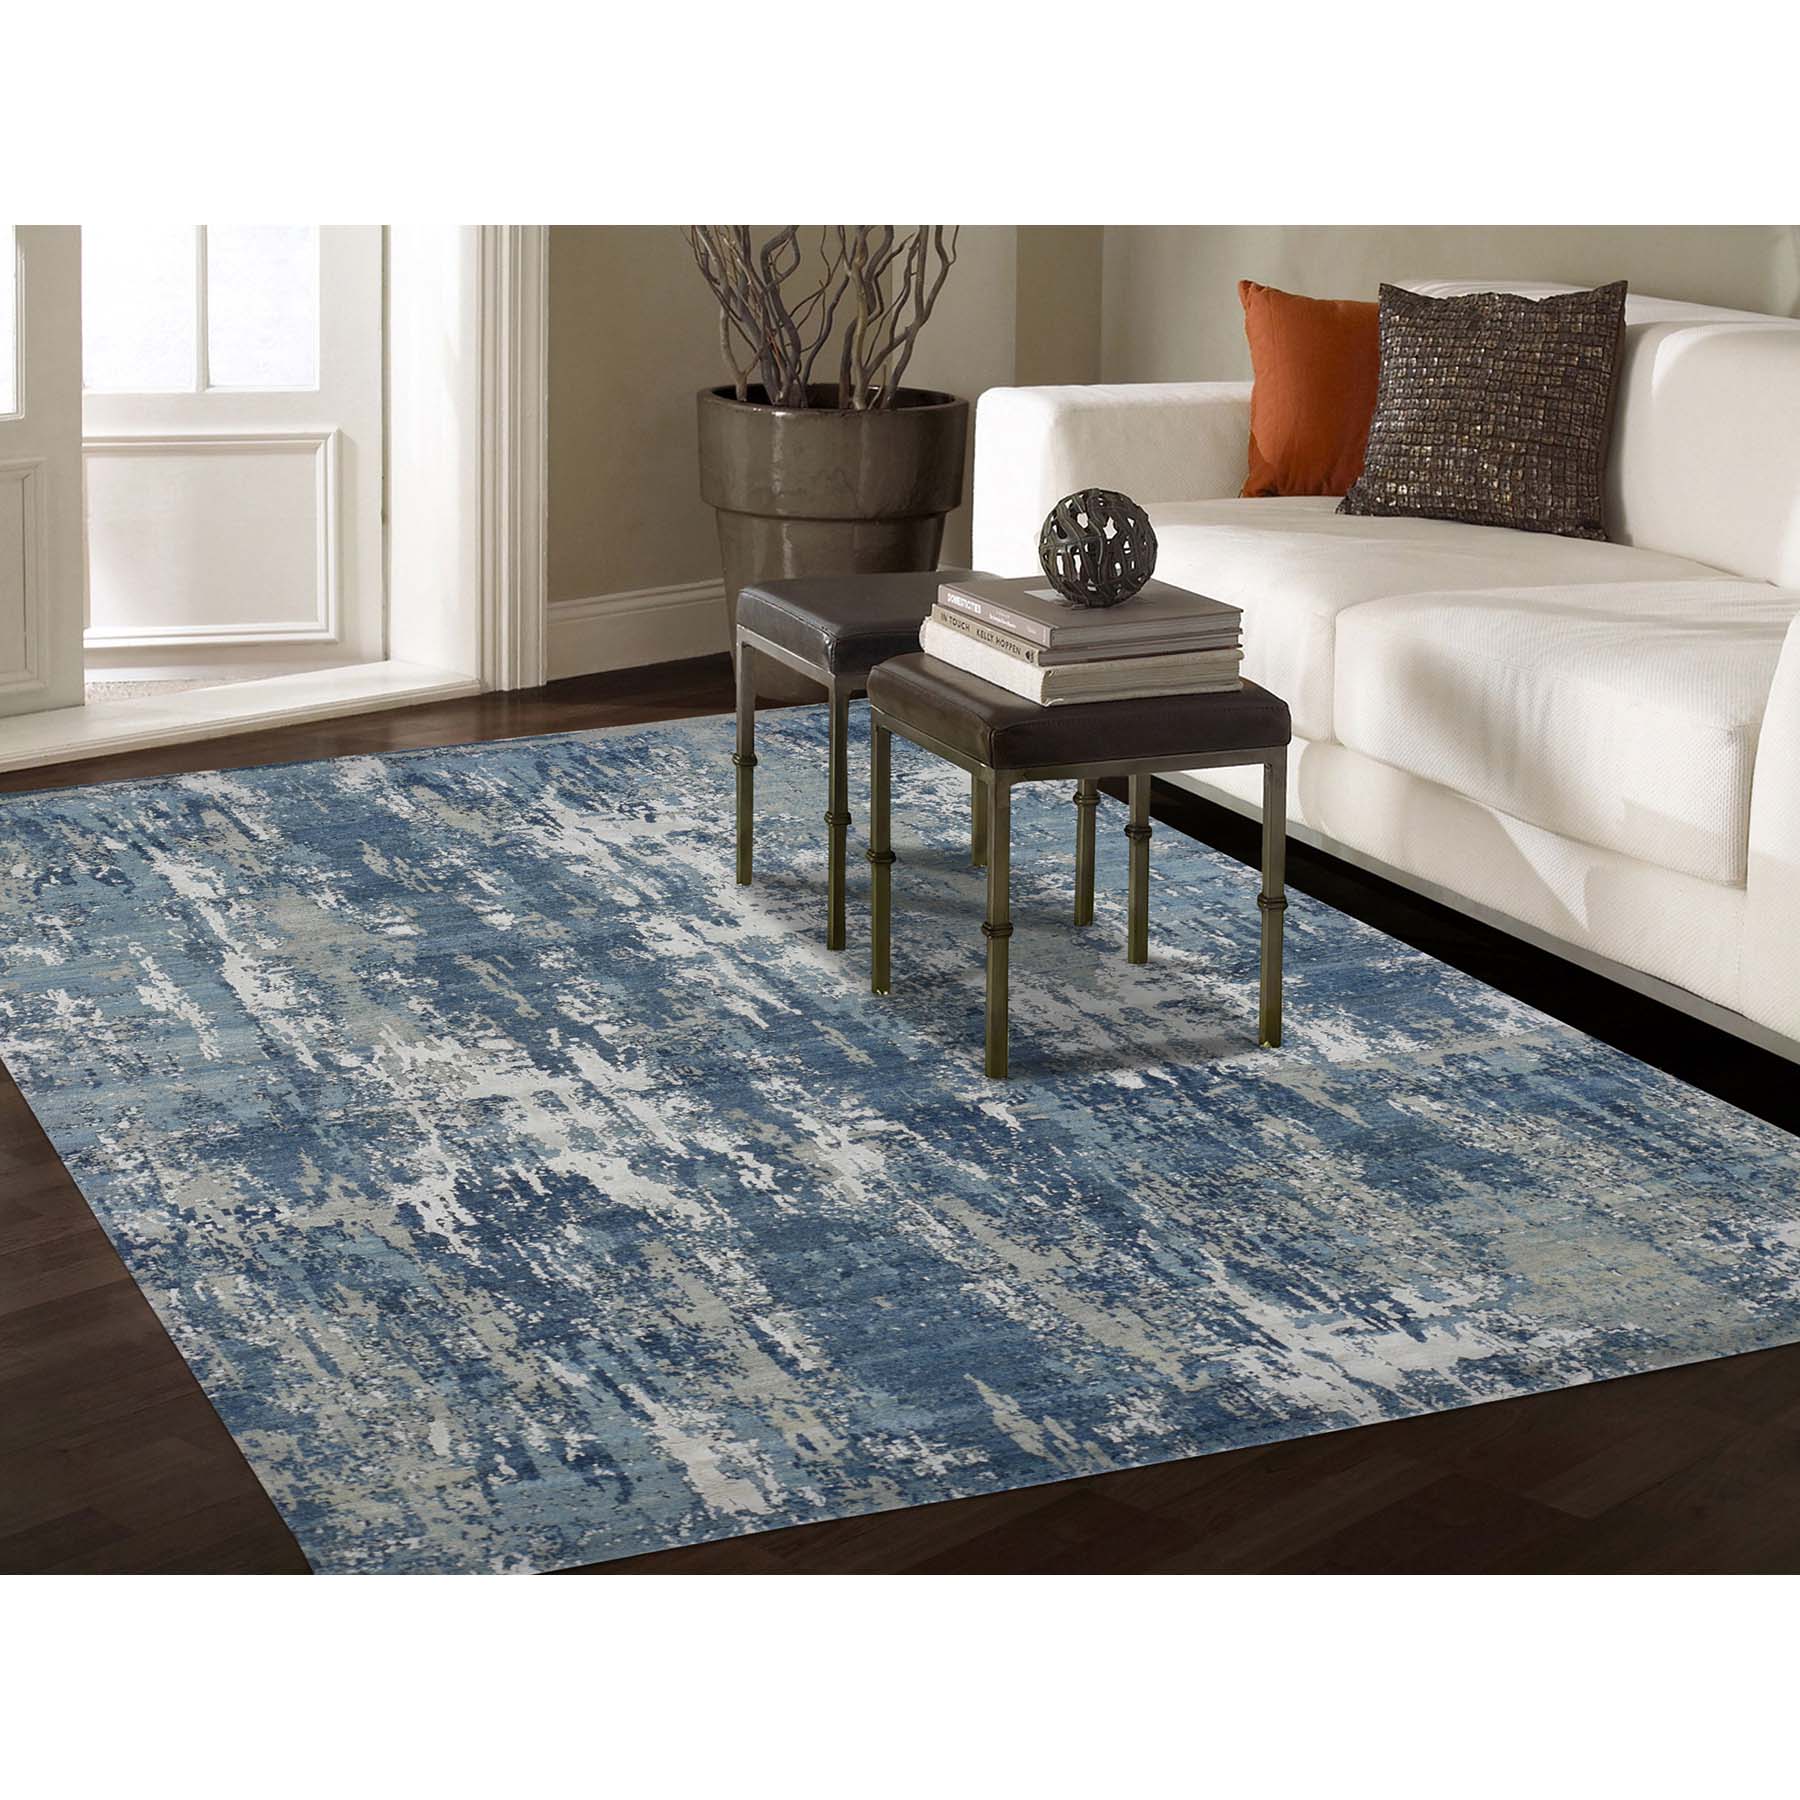 ALAZA Cactus Watercolor Black Area Rug Rugs for Living Room Bedroom 5'3x4' 